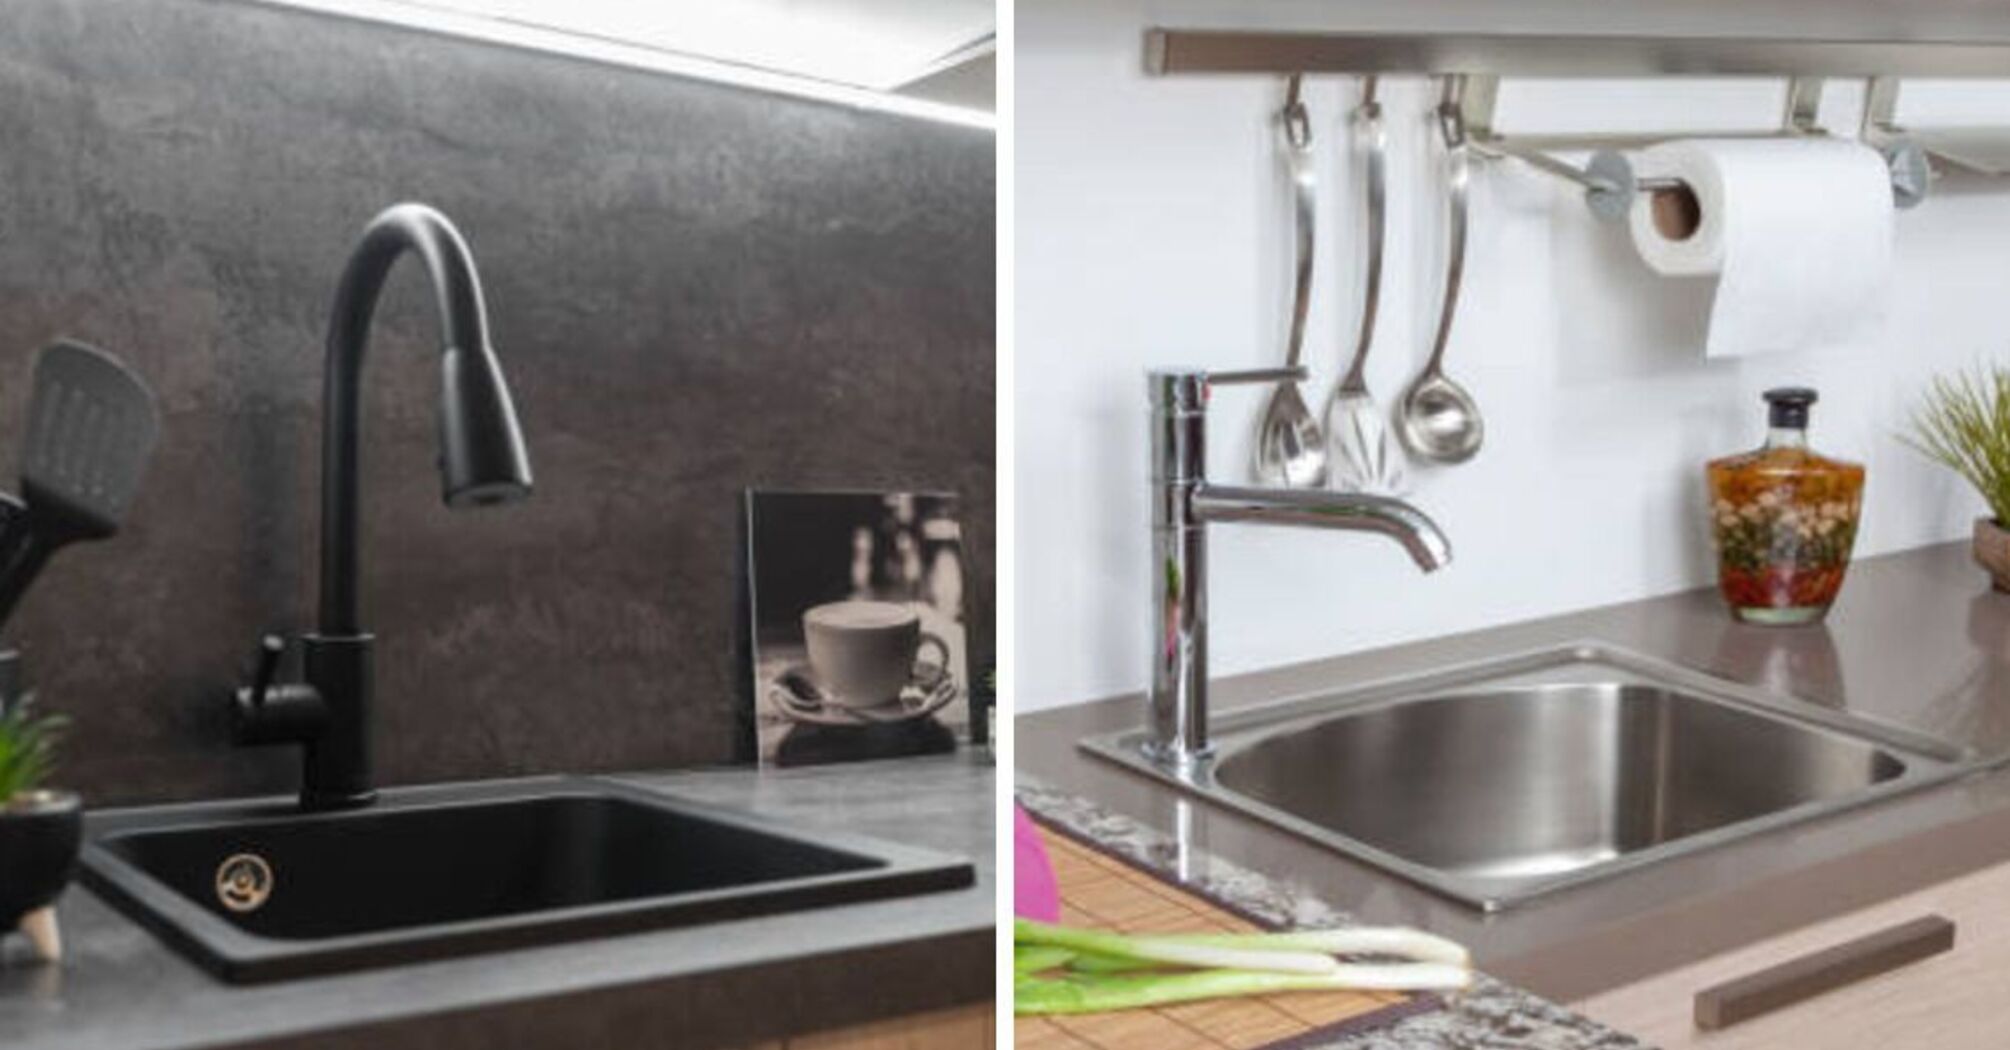 Comparison of stone sinks and stainless steel sinks